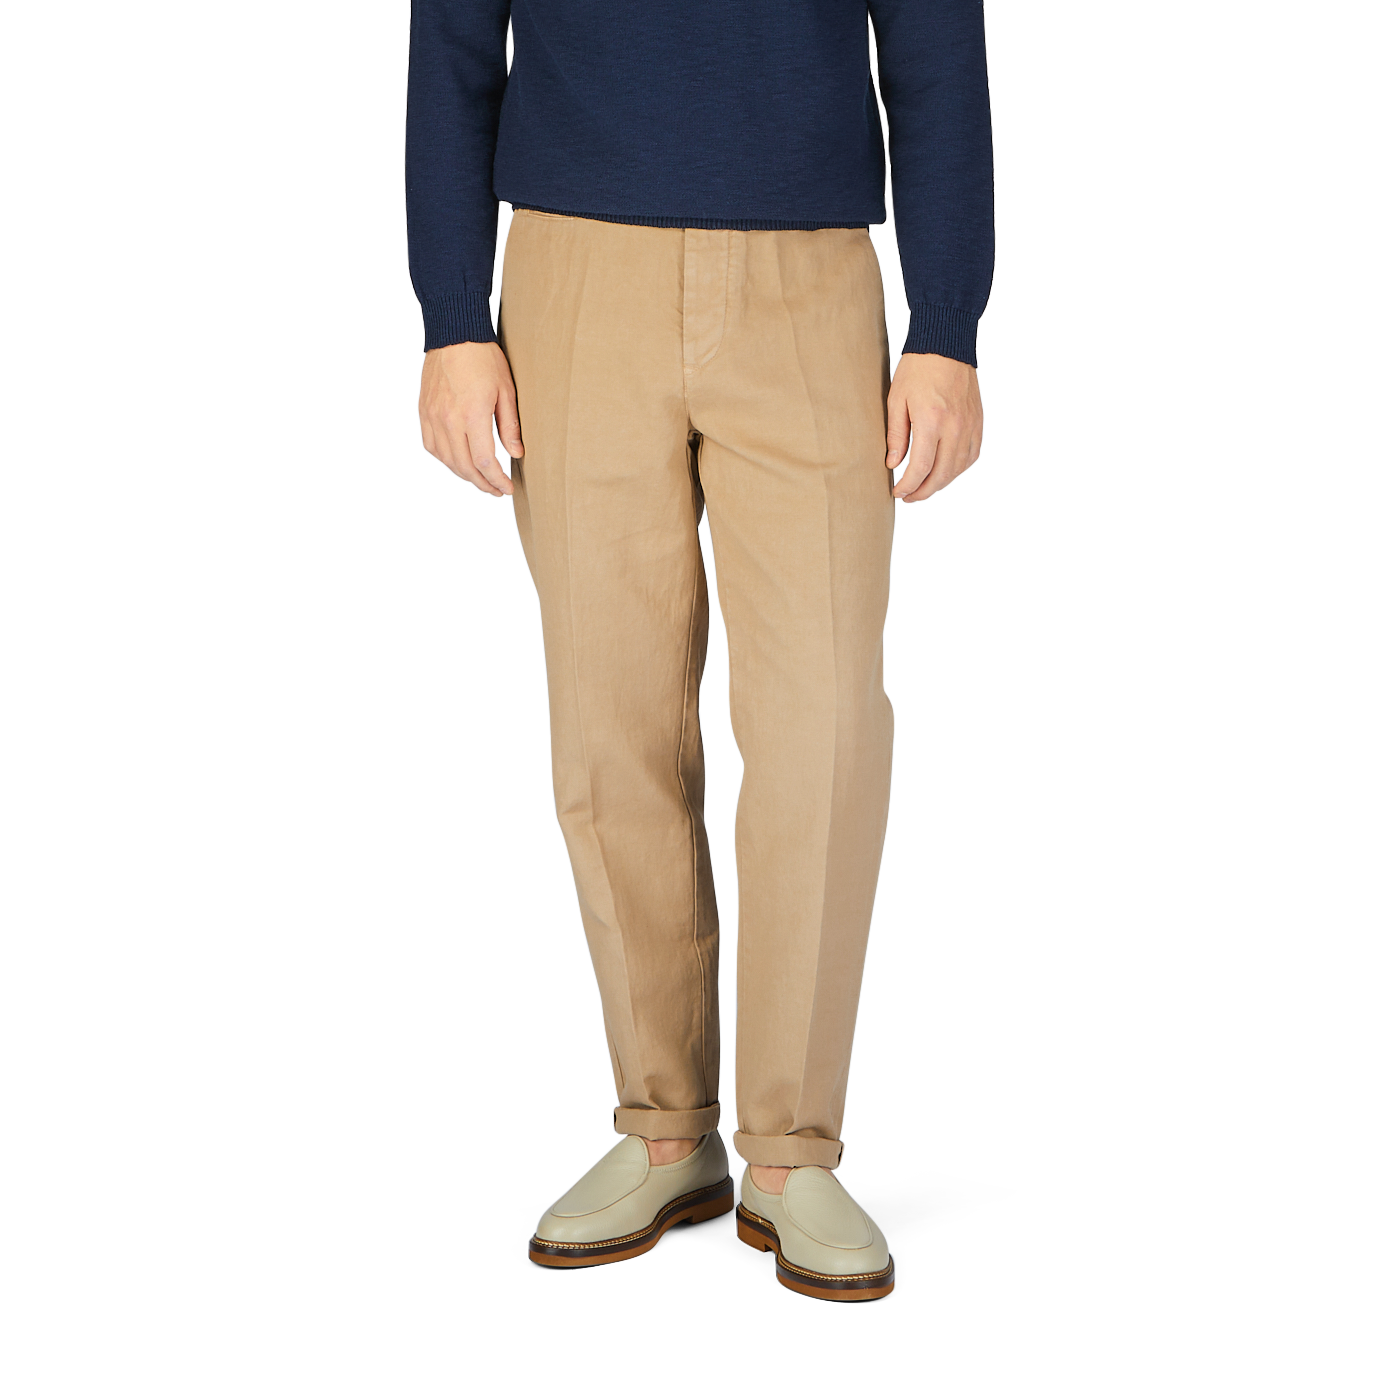 A man wearing Beige Cotton Linen Duilio Trousers from Tela Genova and a navy sweater.